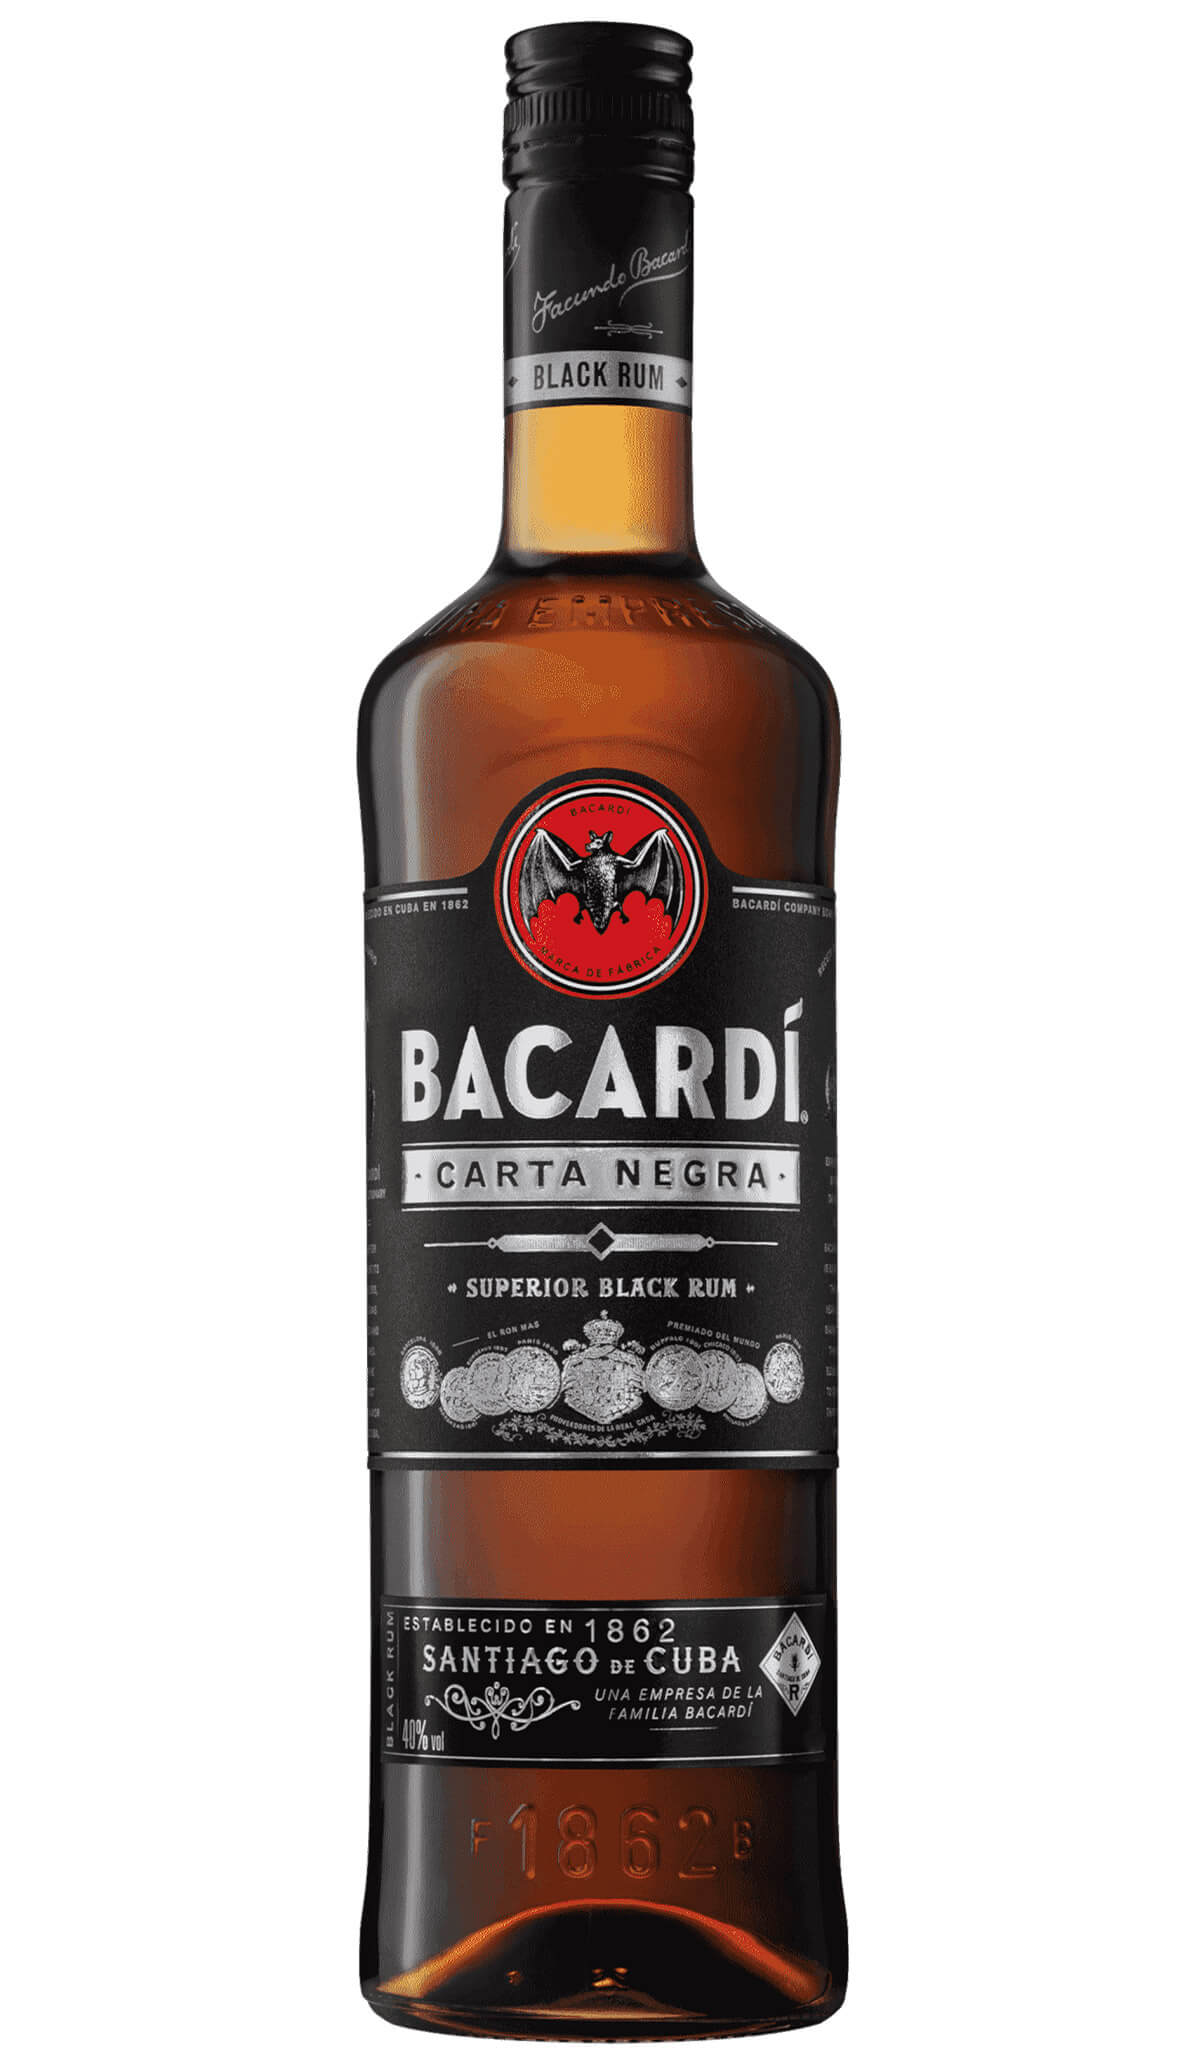 Find out more, explore the range and purchase Bacardi Carta Negra Black Rum 1 Litre available online at Wine Sellers Direct - Australia's independent liquor specialists.